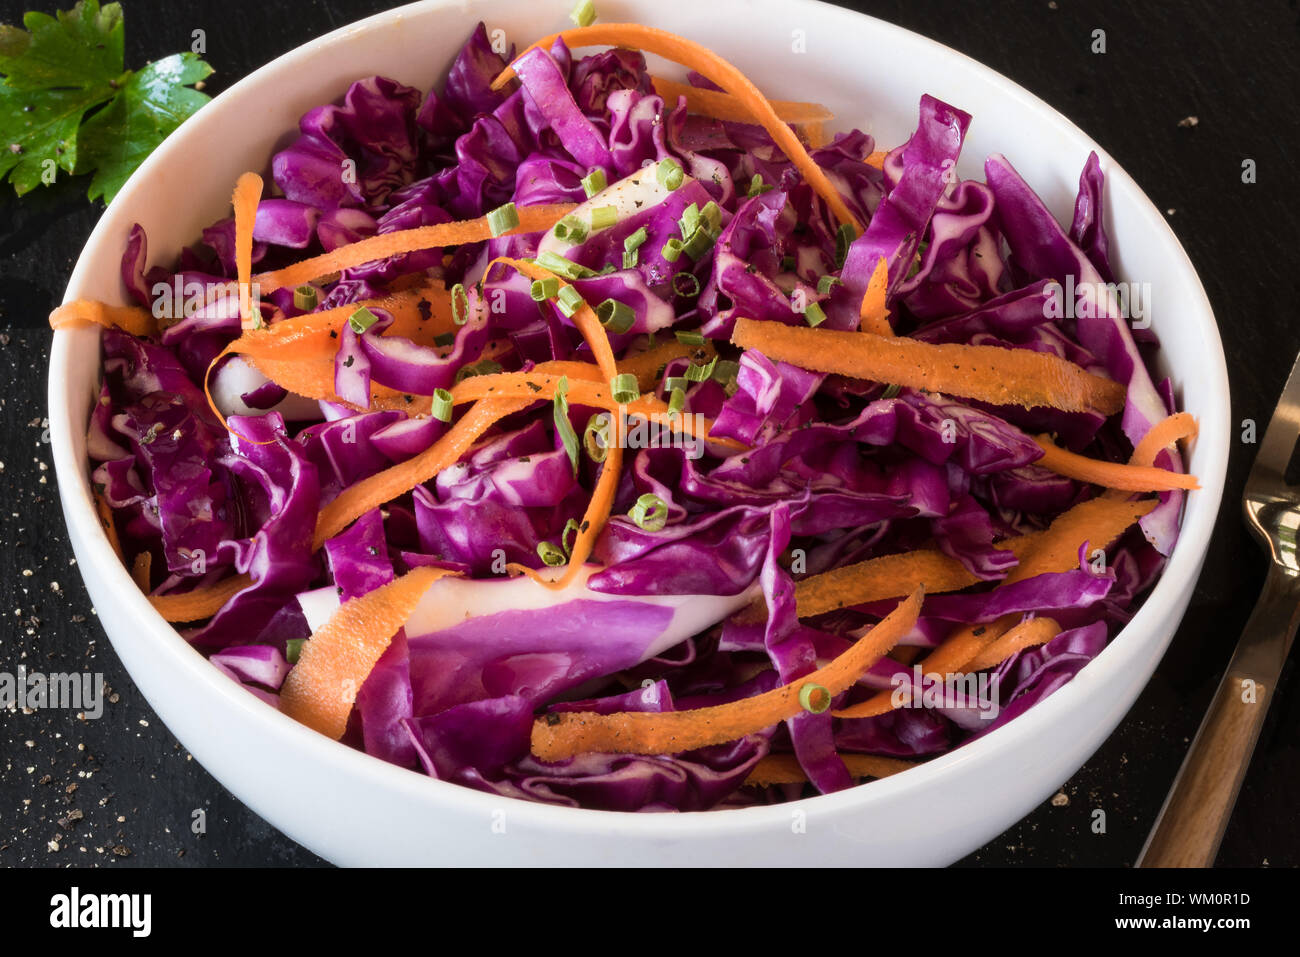 Close-up Of Red Cabbage Coleslaw In Bowl On Table Stock Photo